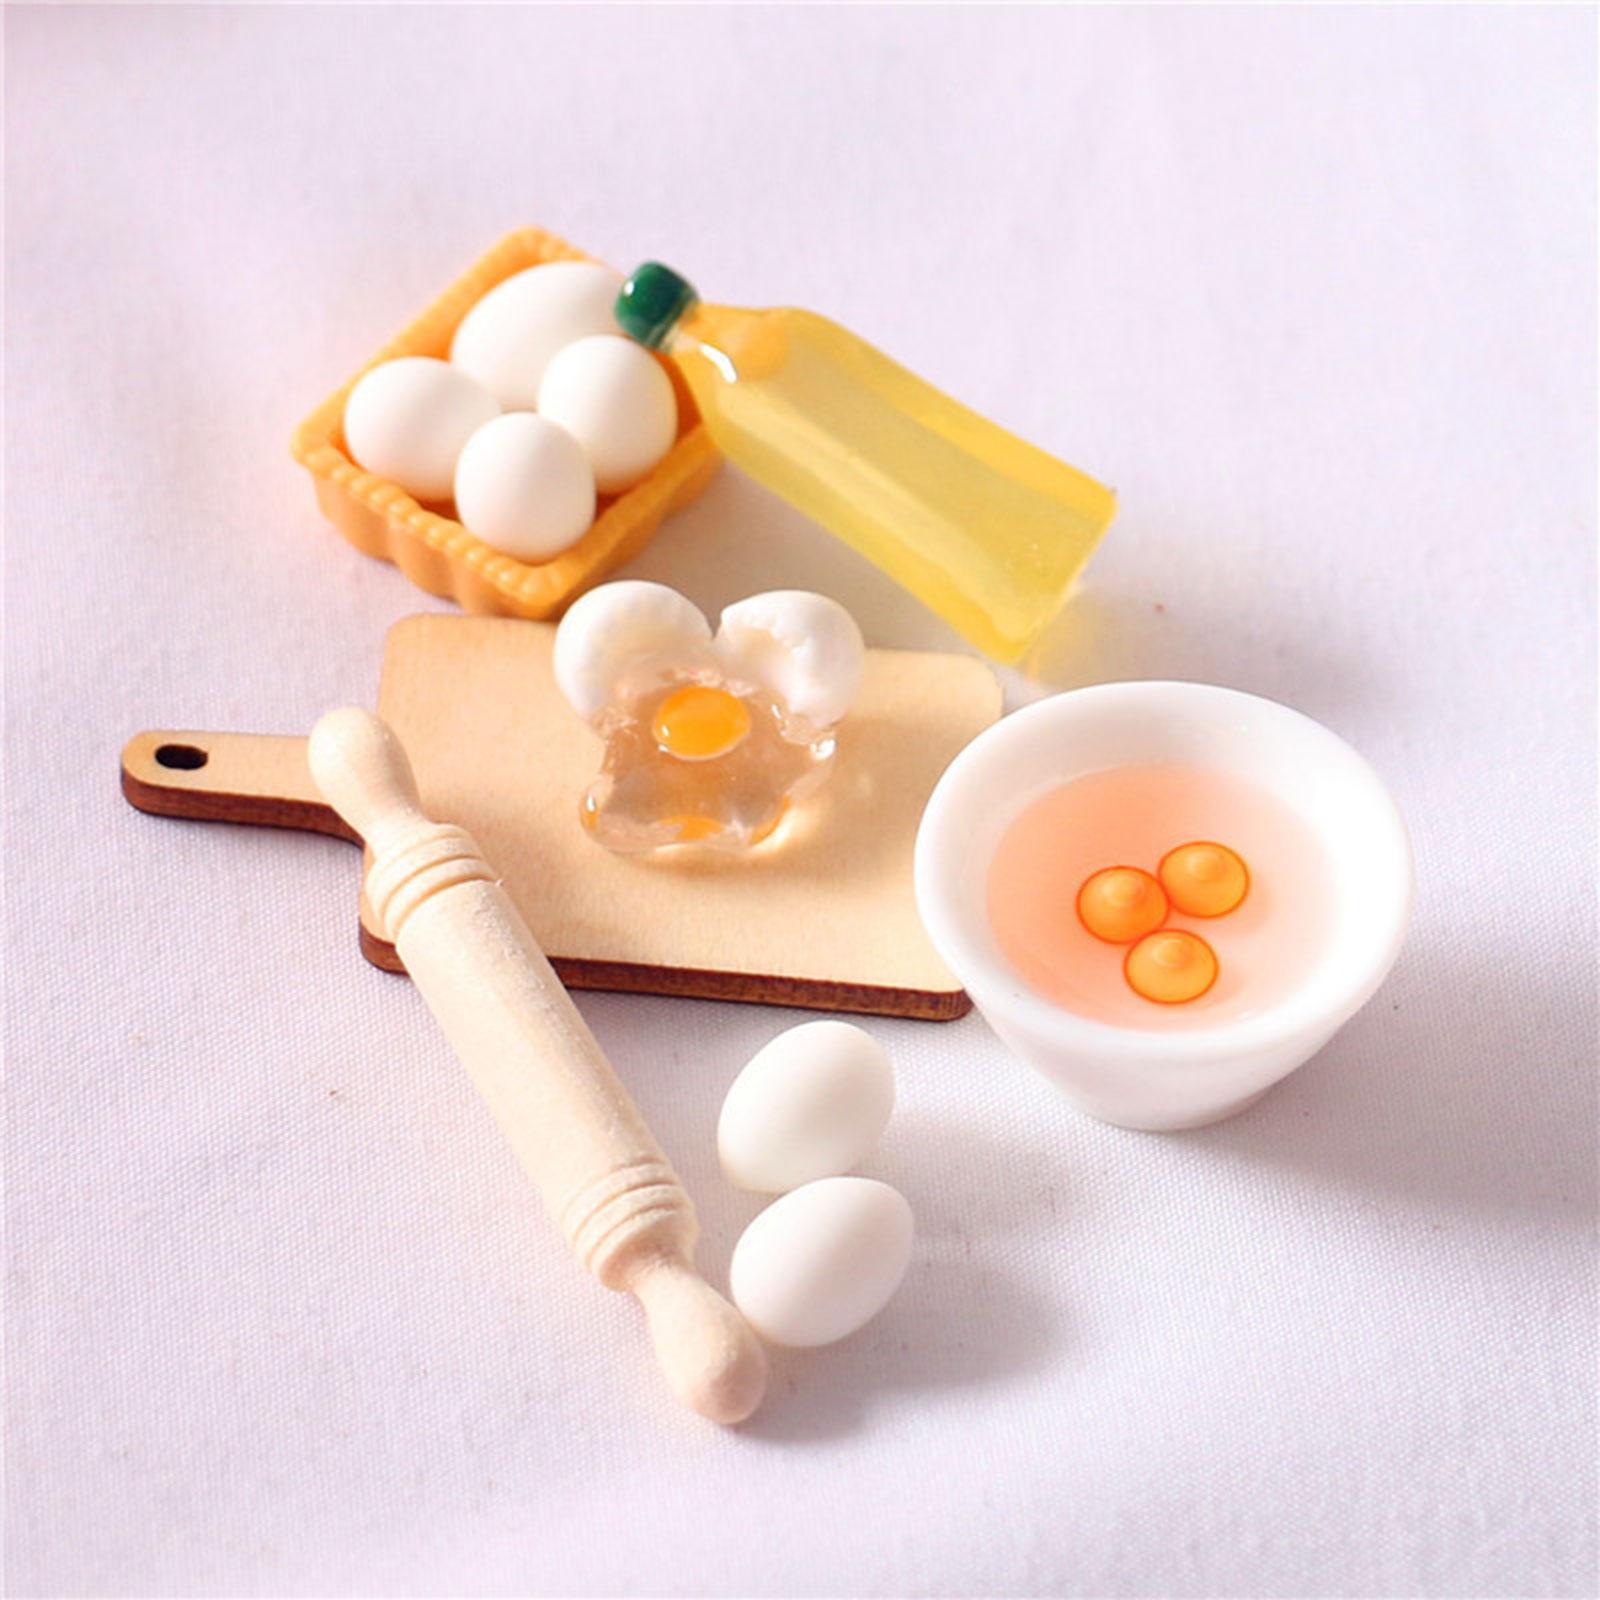 Food Toys Doll House Kitchen Accessories Simulation Furniture for Children